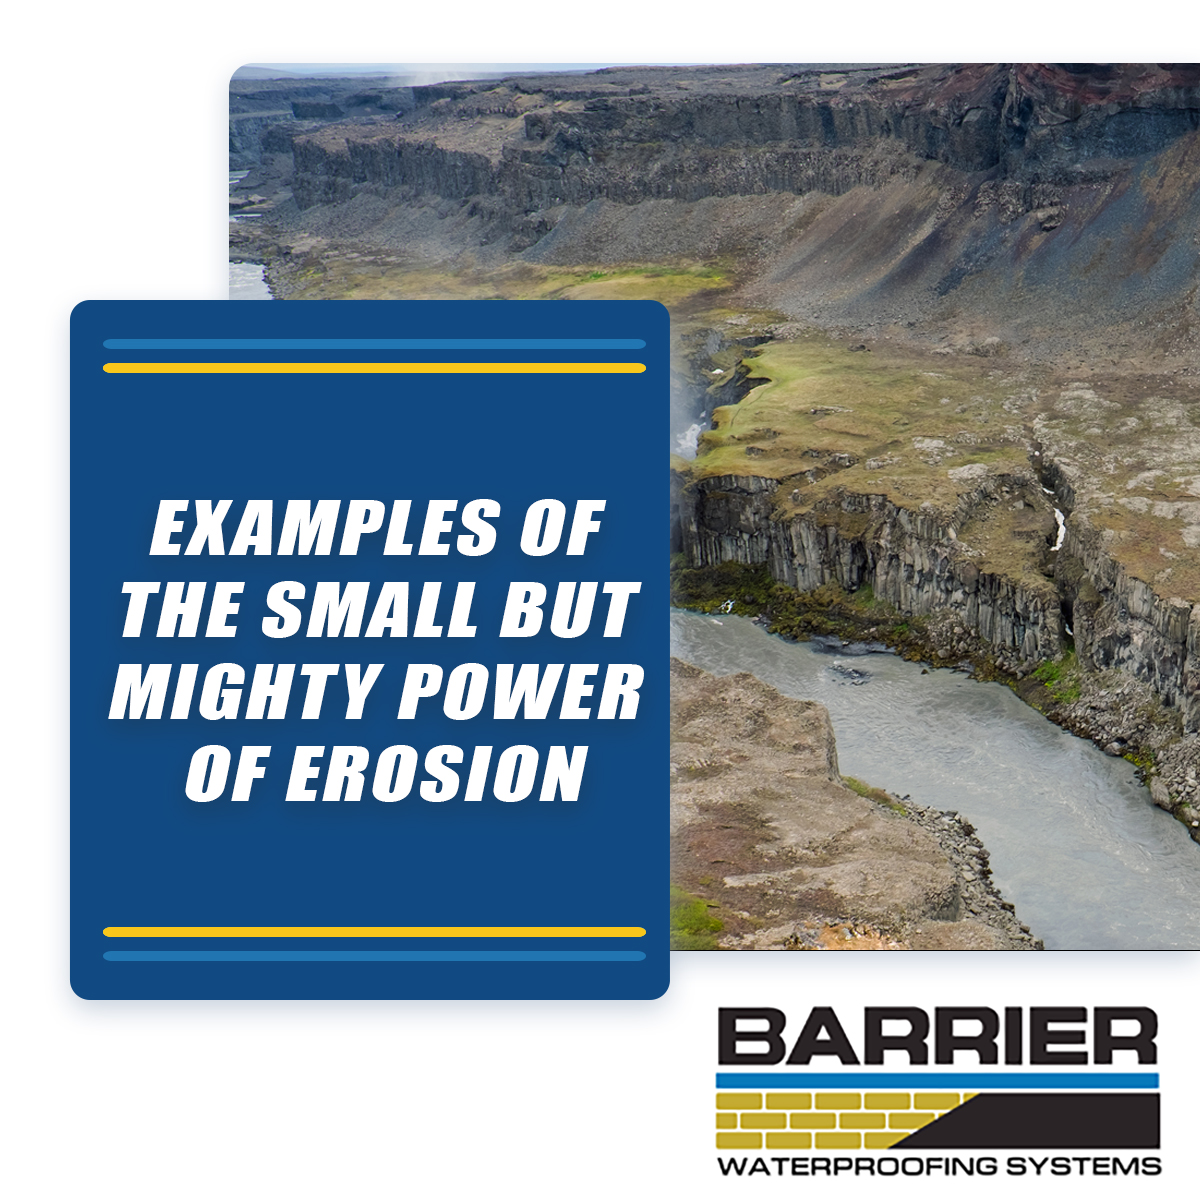 Examples-of-the-Small-but-Mighty-Power-of-Erosion